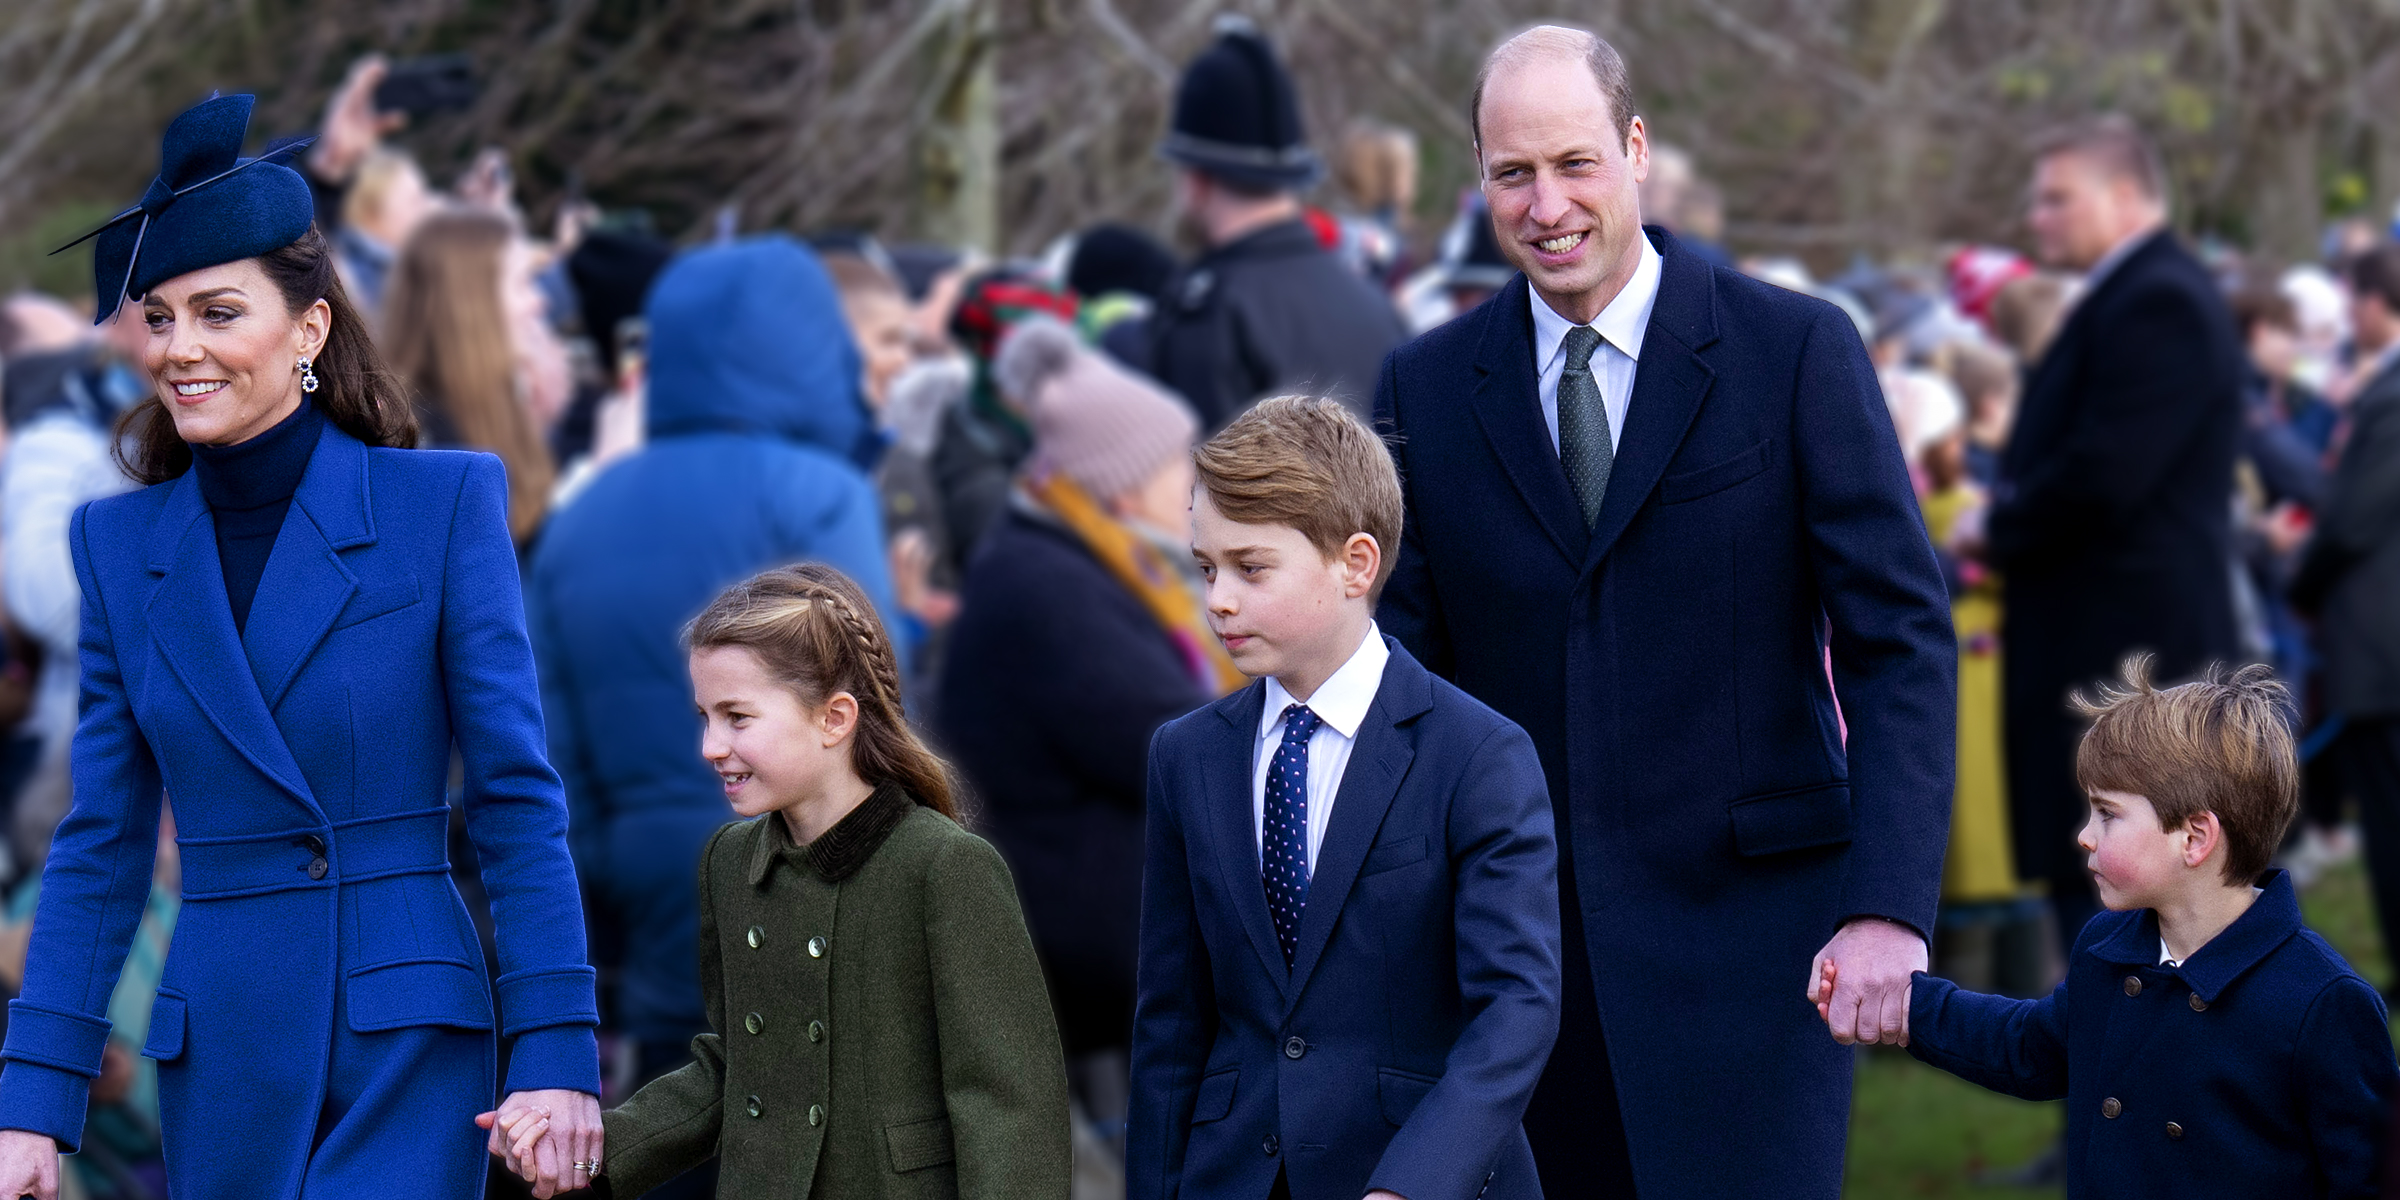 Princess Catherine and Prince William with Prince Louis, Prince George, and Princess Charlotte | Source: Getty Images